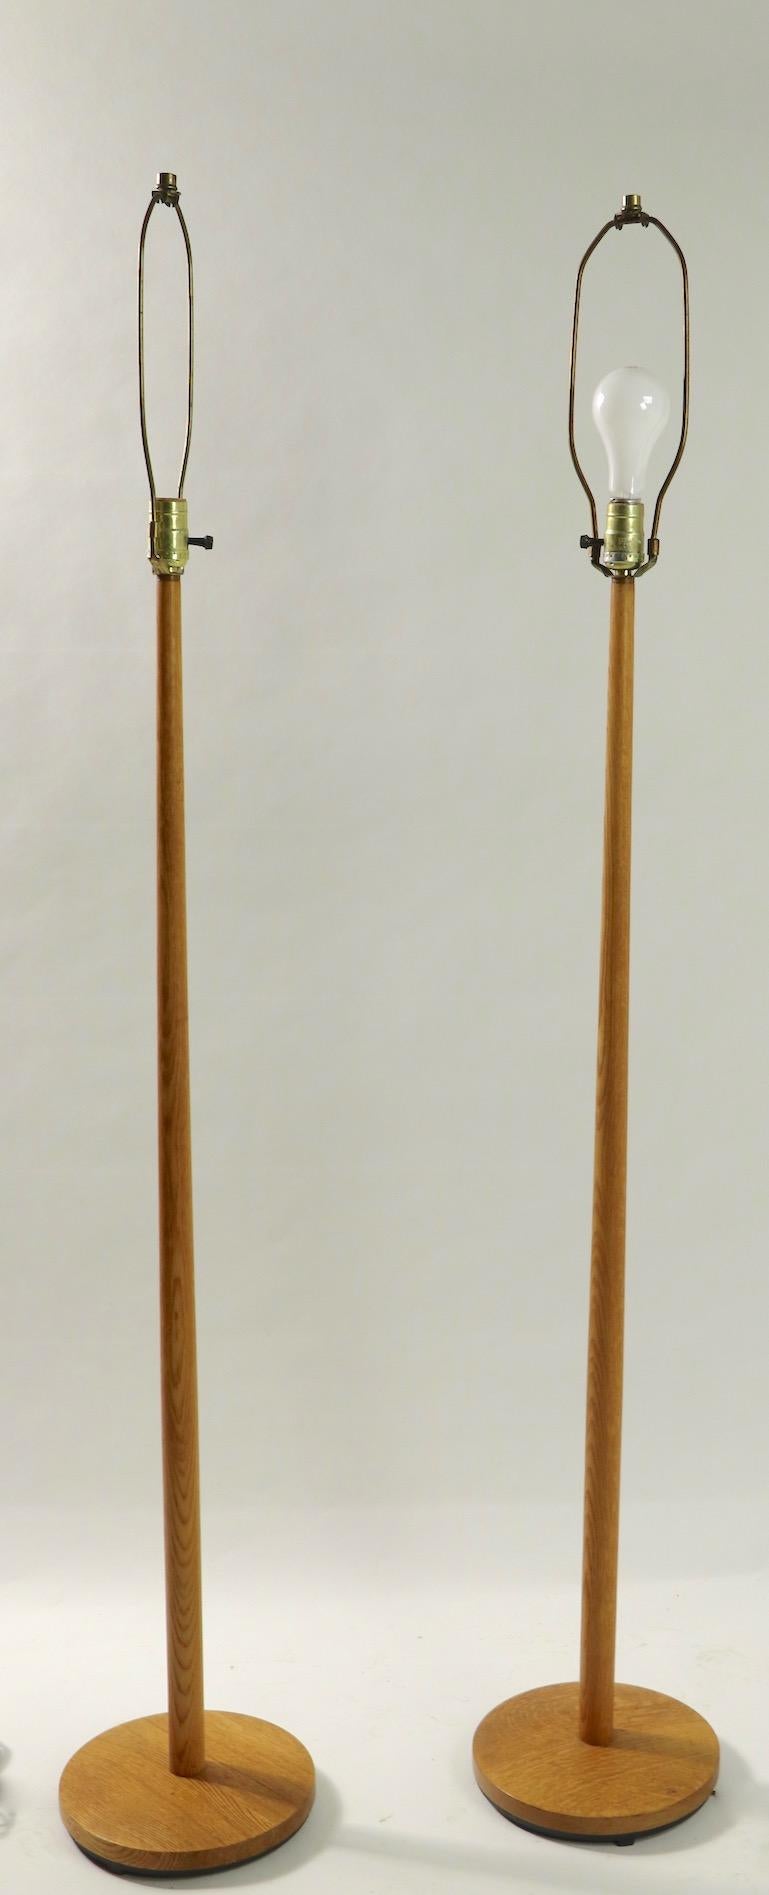 Very chic pair of solid oak pole lamps marked made in Sweden. Midcentury Danish modern style floor lamps in unusually clean condition, working and ready to use. Priced and offered as a pair - shades not included.